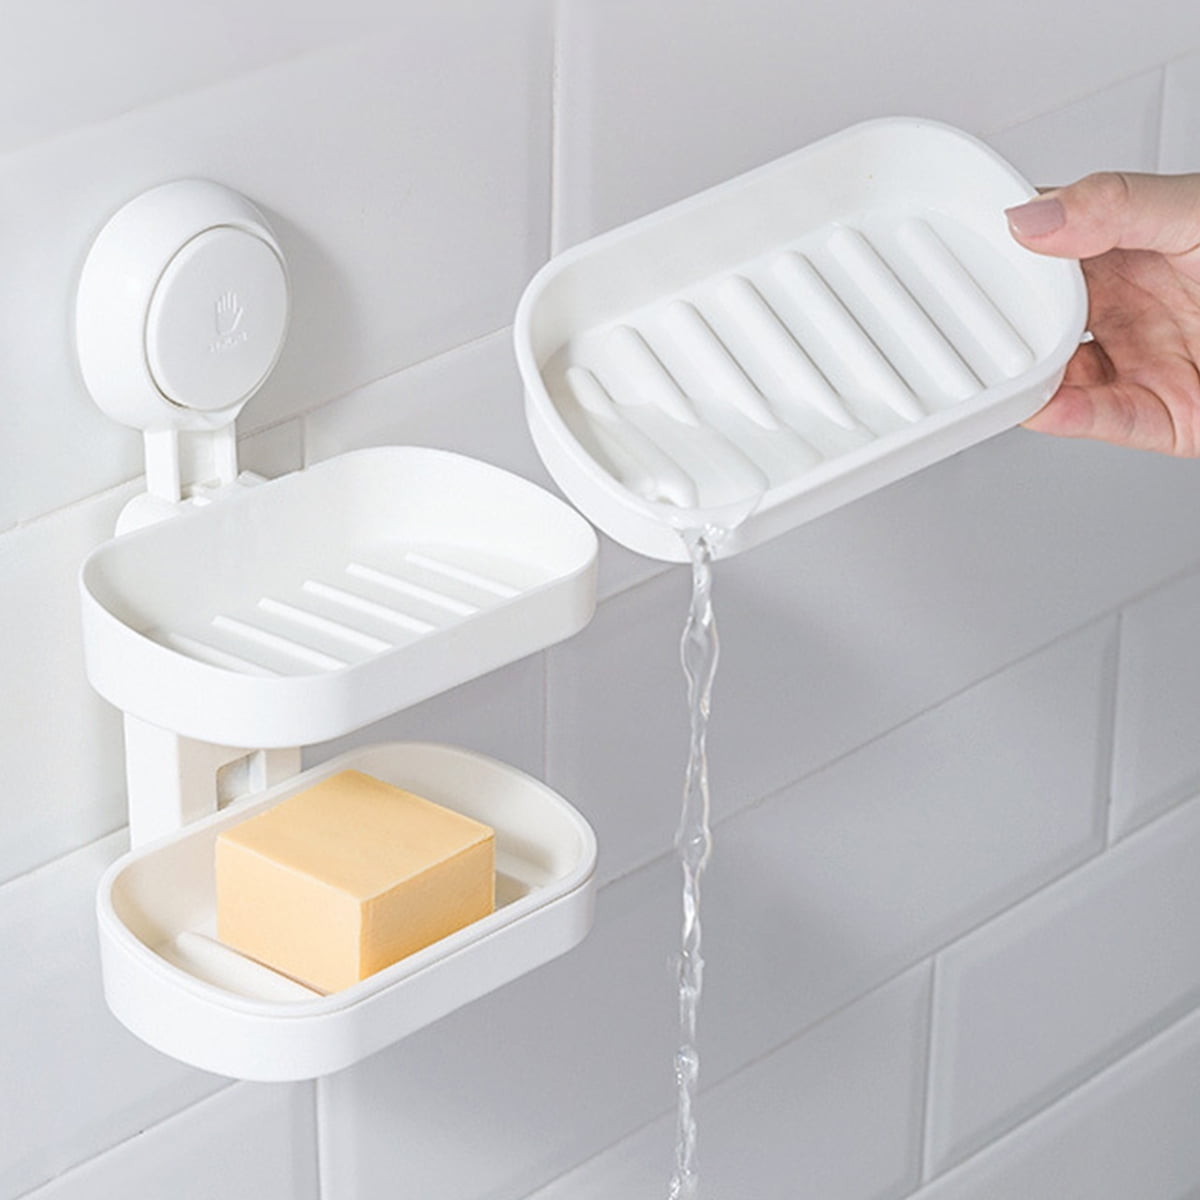 OYOREFD Strong Wall Mounted Stainless Steel Soap Holder Bathroom Double  Layer Drain Soap Tray Shower Soap Dish Bathroom Products